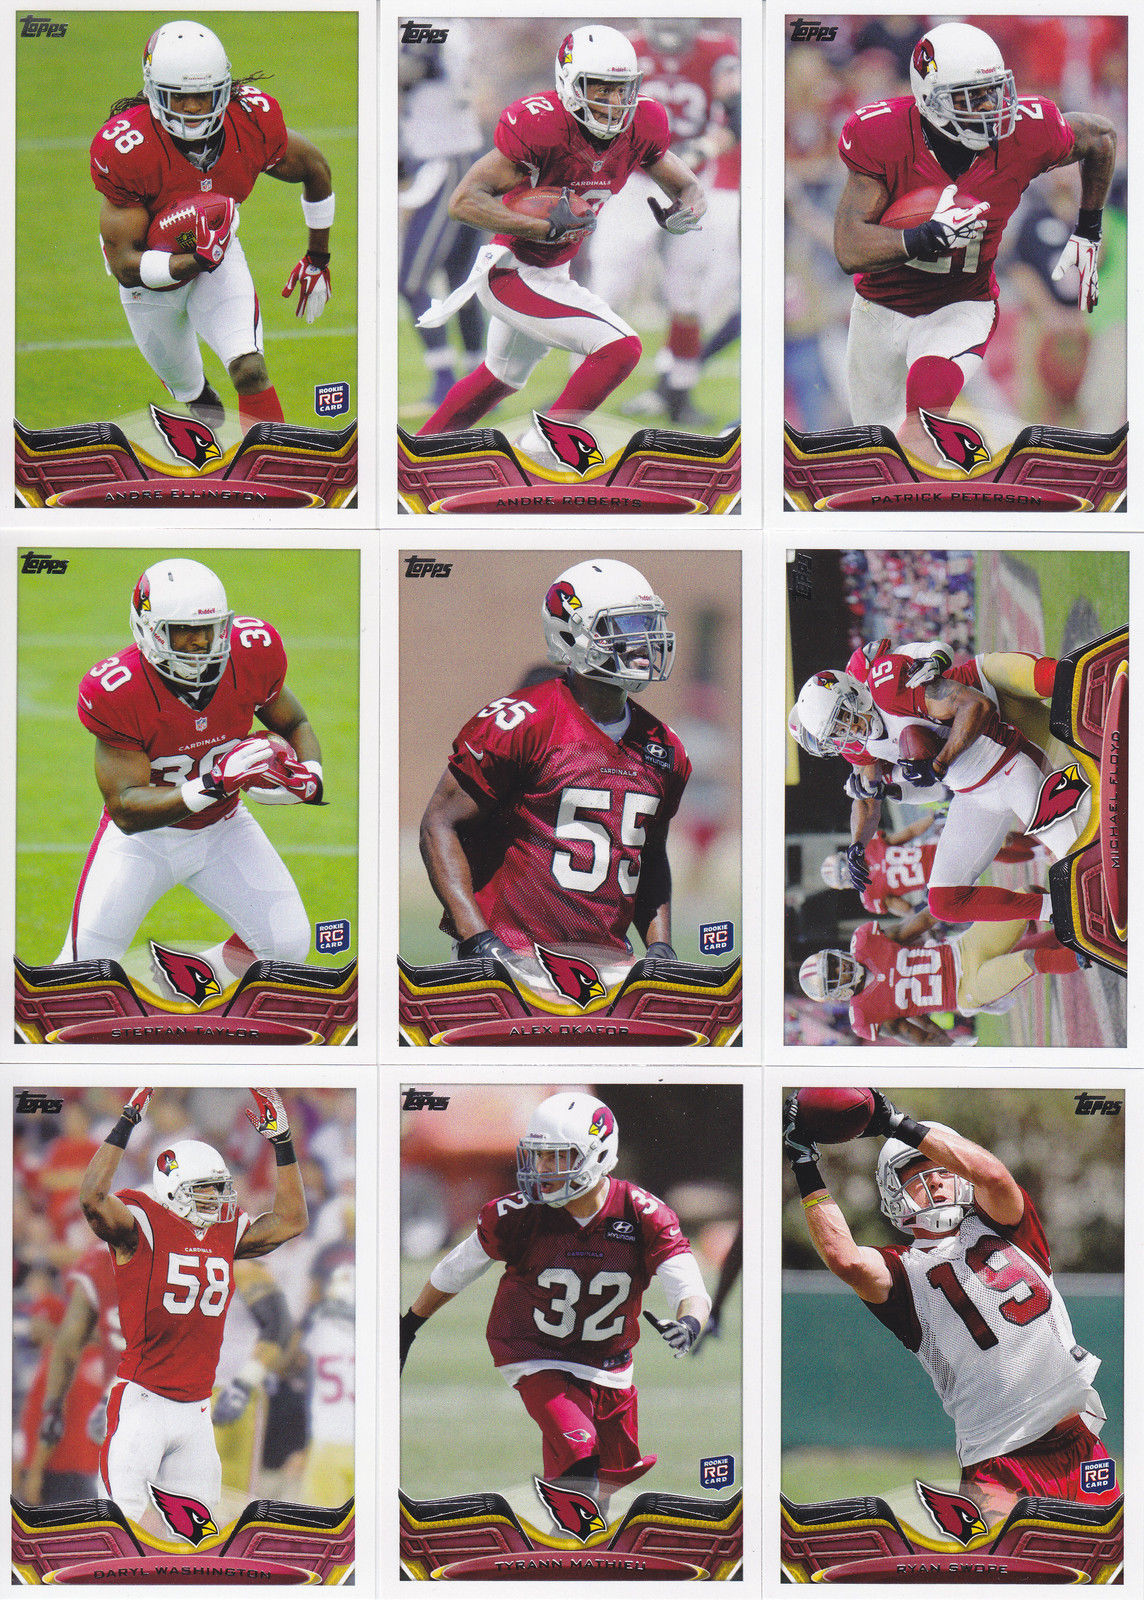 Arizona Cardinals 2013 Topps Team Set with Larry Fitzgerald and